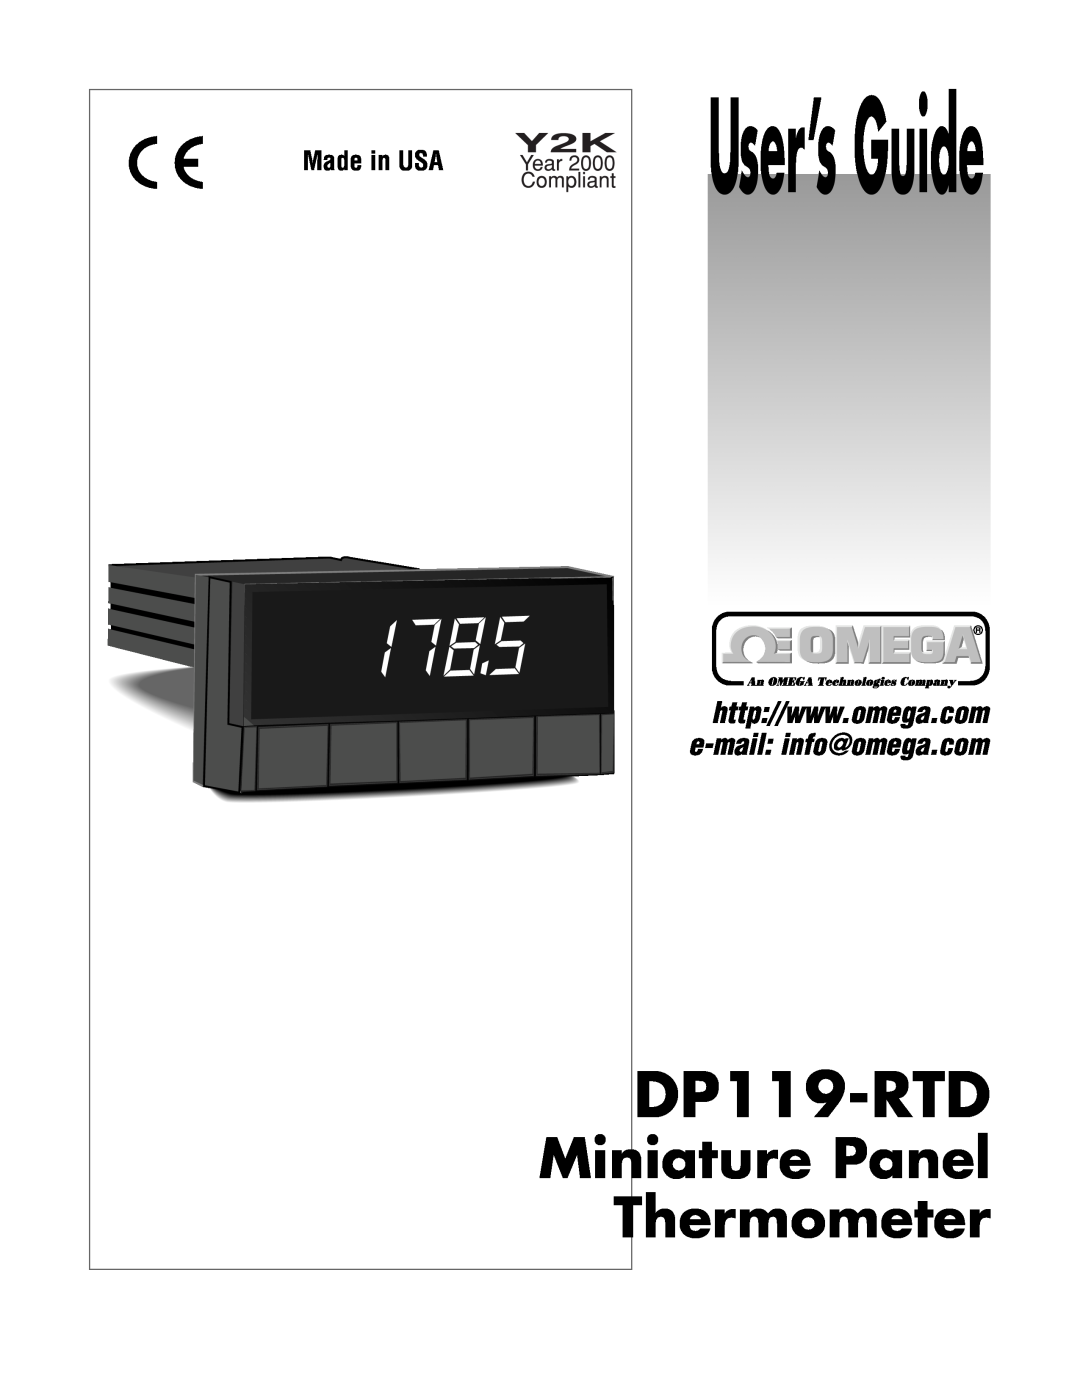 Omega DP119-RTD manual Miniature Panel, Thermometer, UserÕs Guide, Made in USA, e-mail info@omega.com 